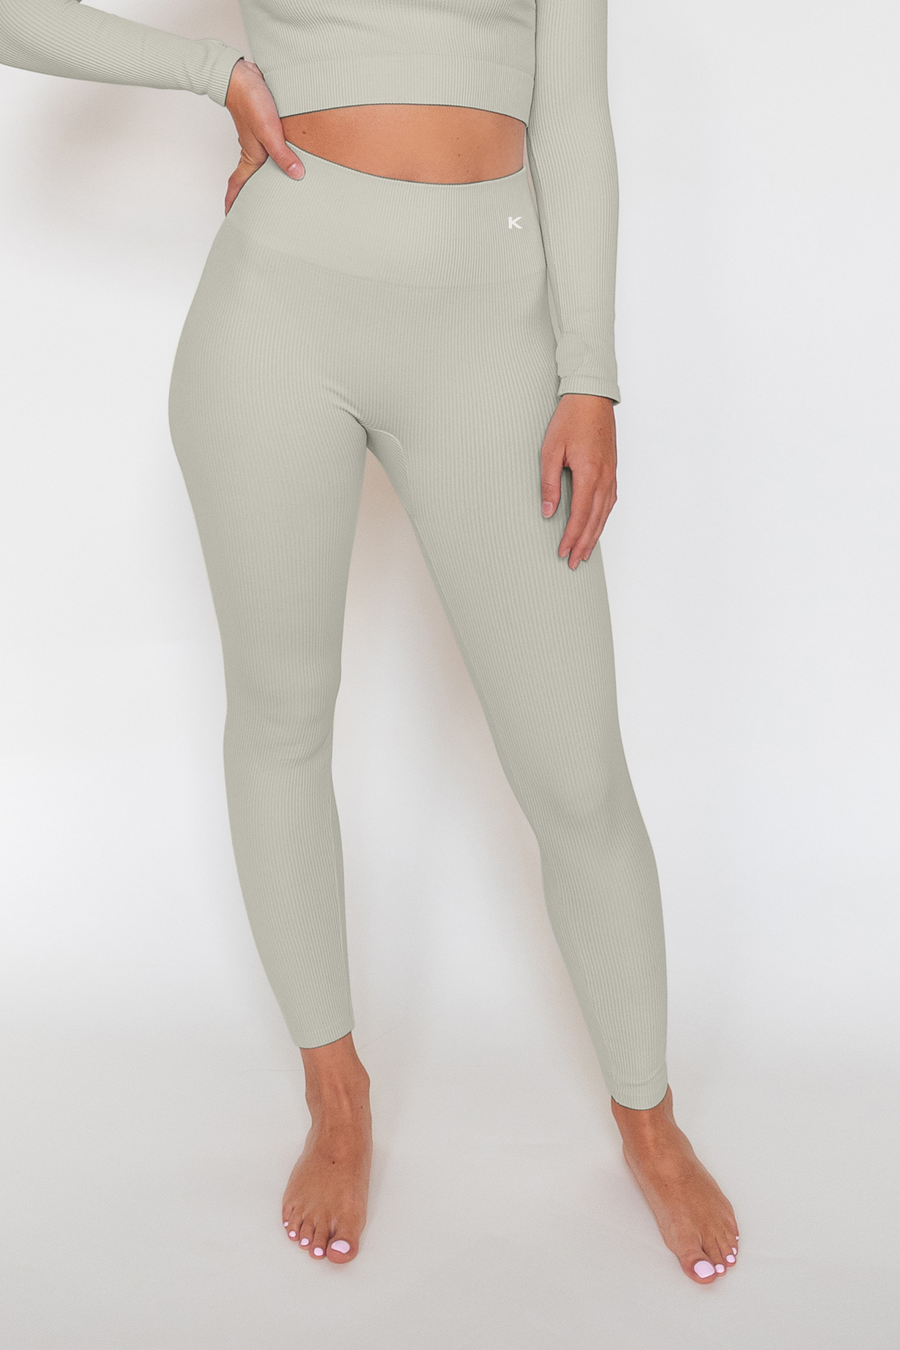 This green sage high-waisted ribbed and seamless legging are the perfect bottoms to wear all day long. Ideal for the gym, to stay at home or to bring a touch of color to an outfit. These really are a must have in any wardrobe.